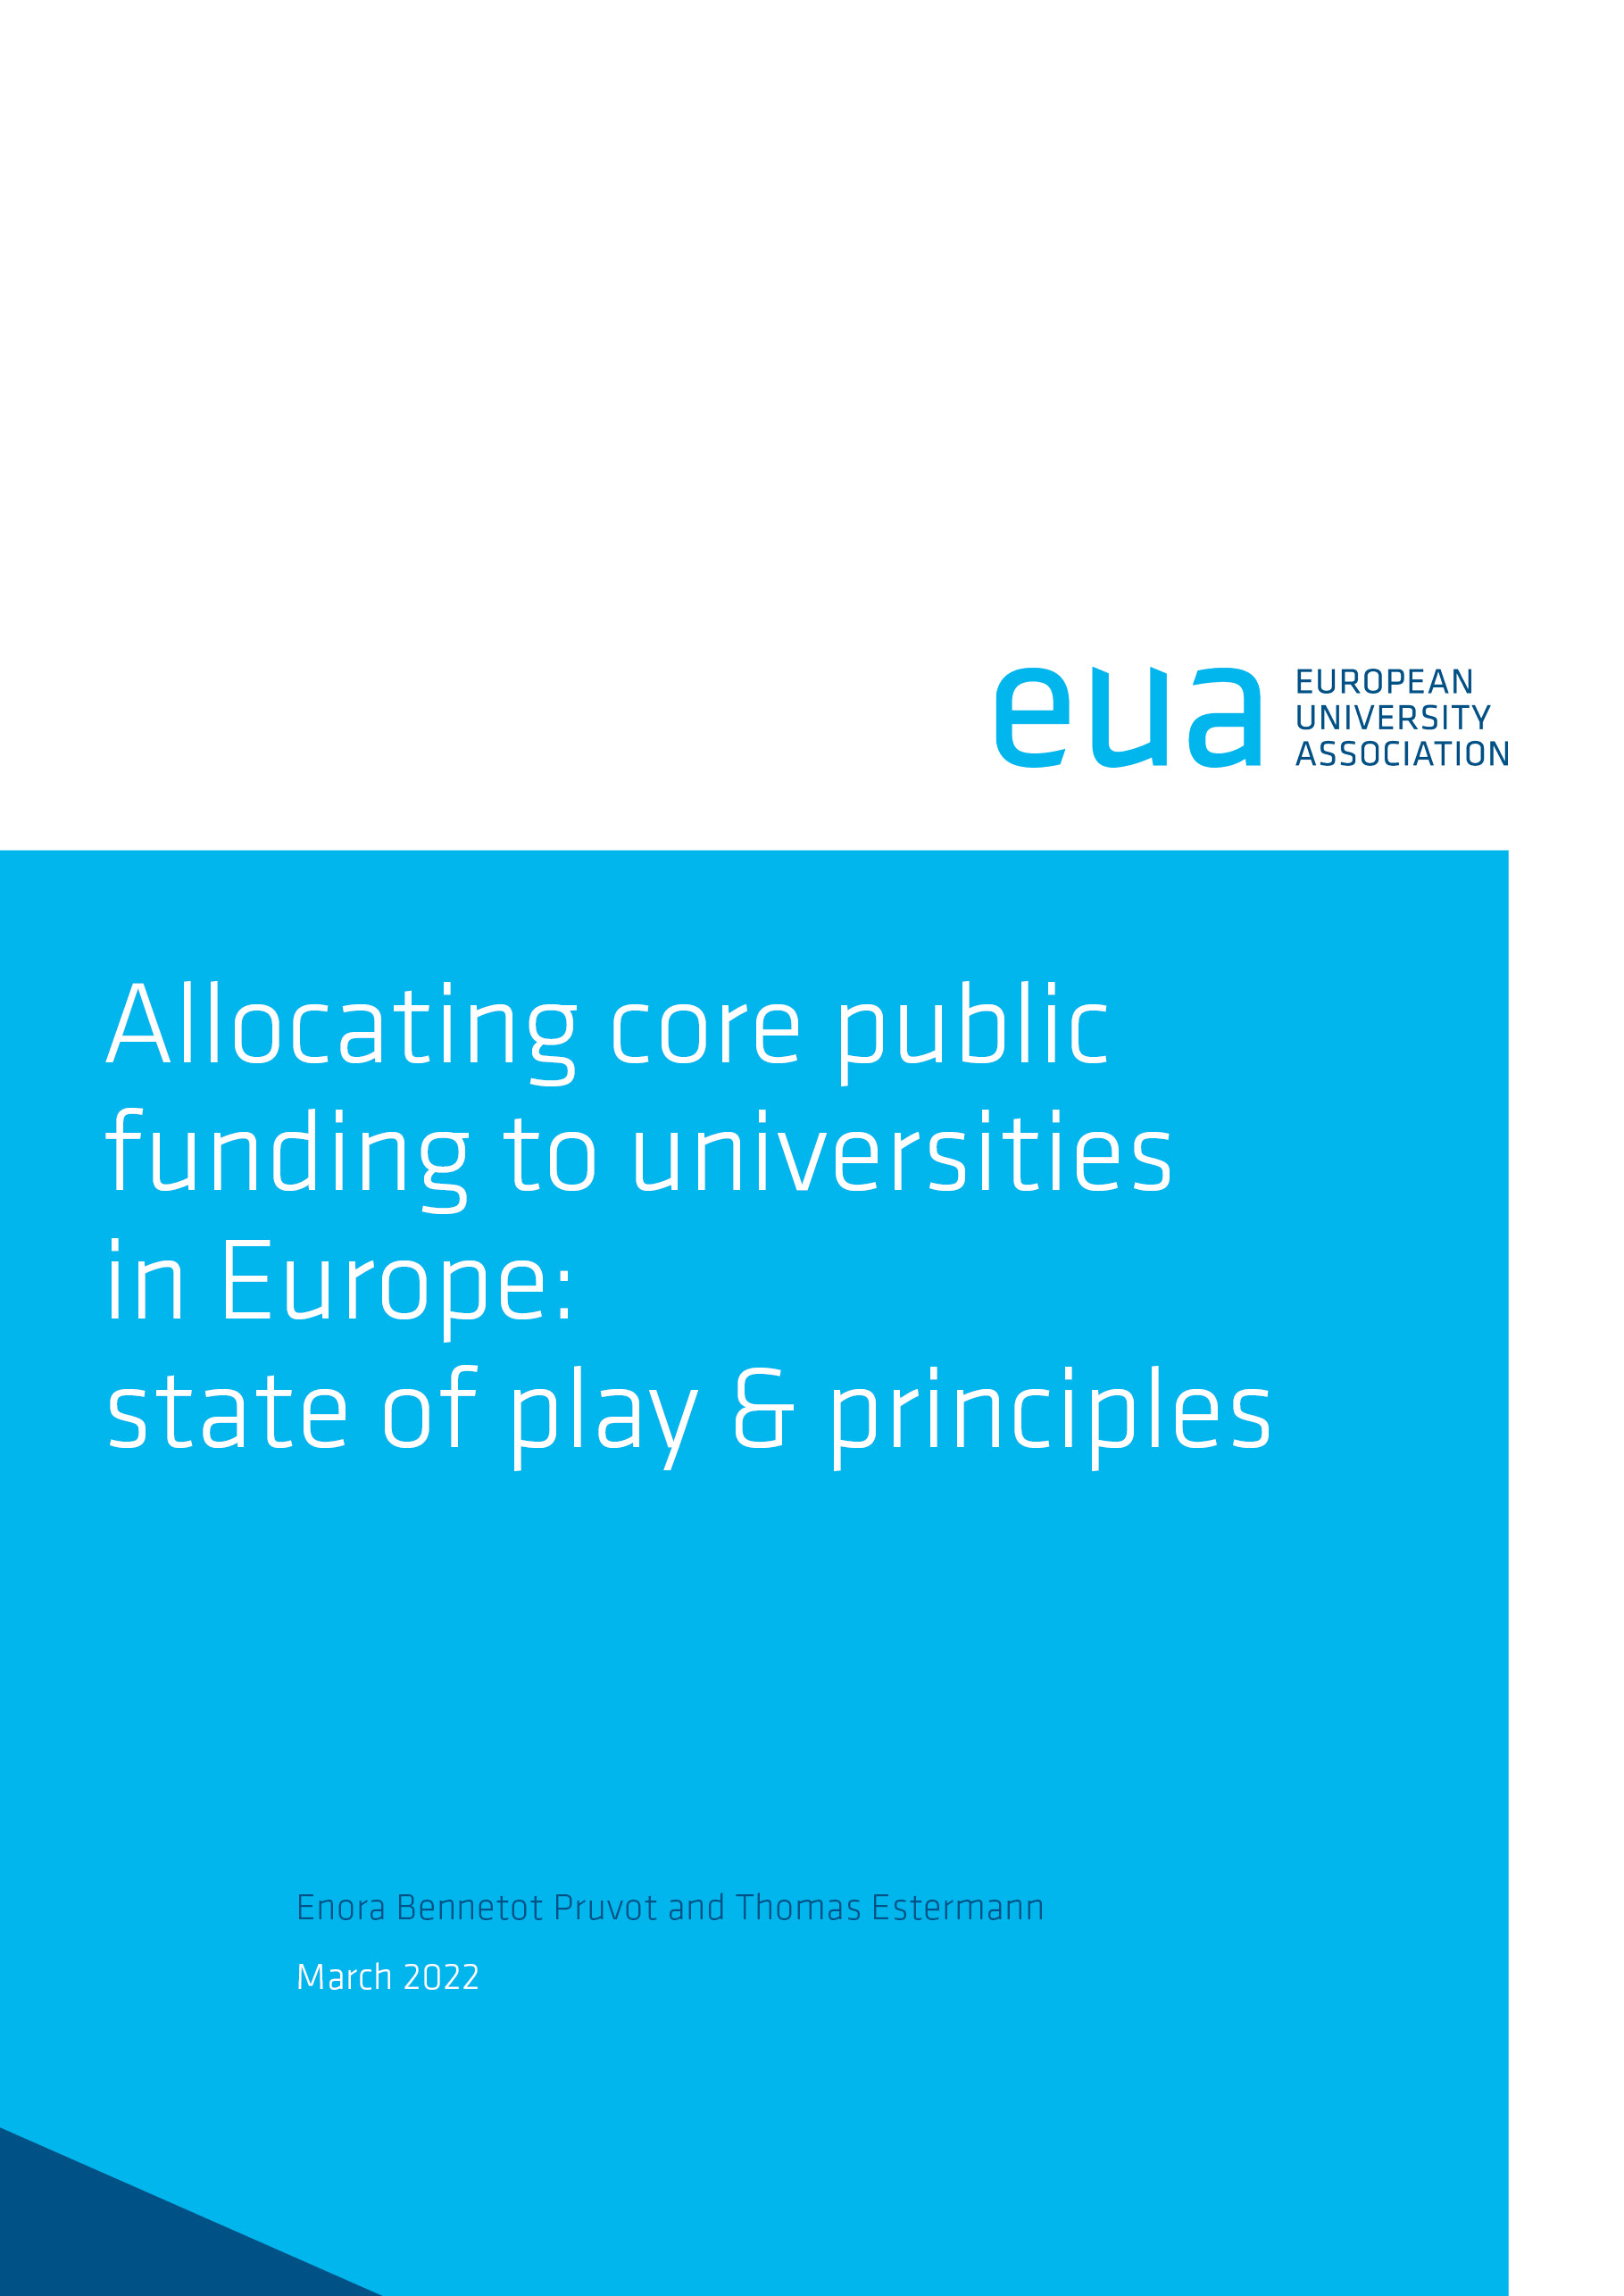 Allocating core public funding to universities in Europe: state of play & principles